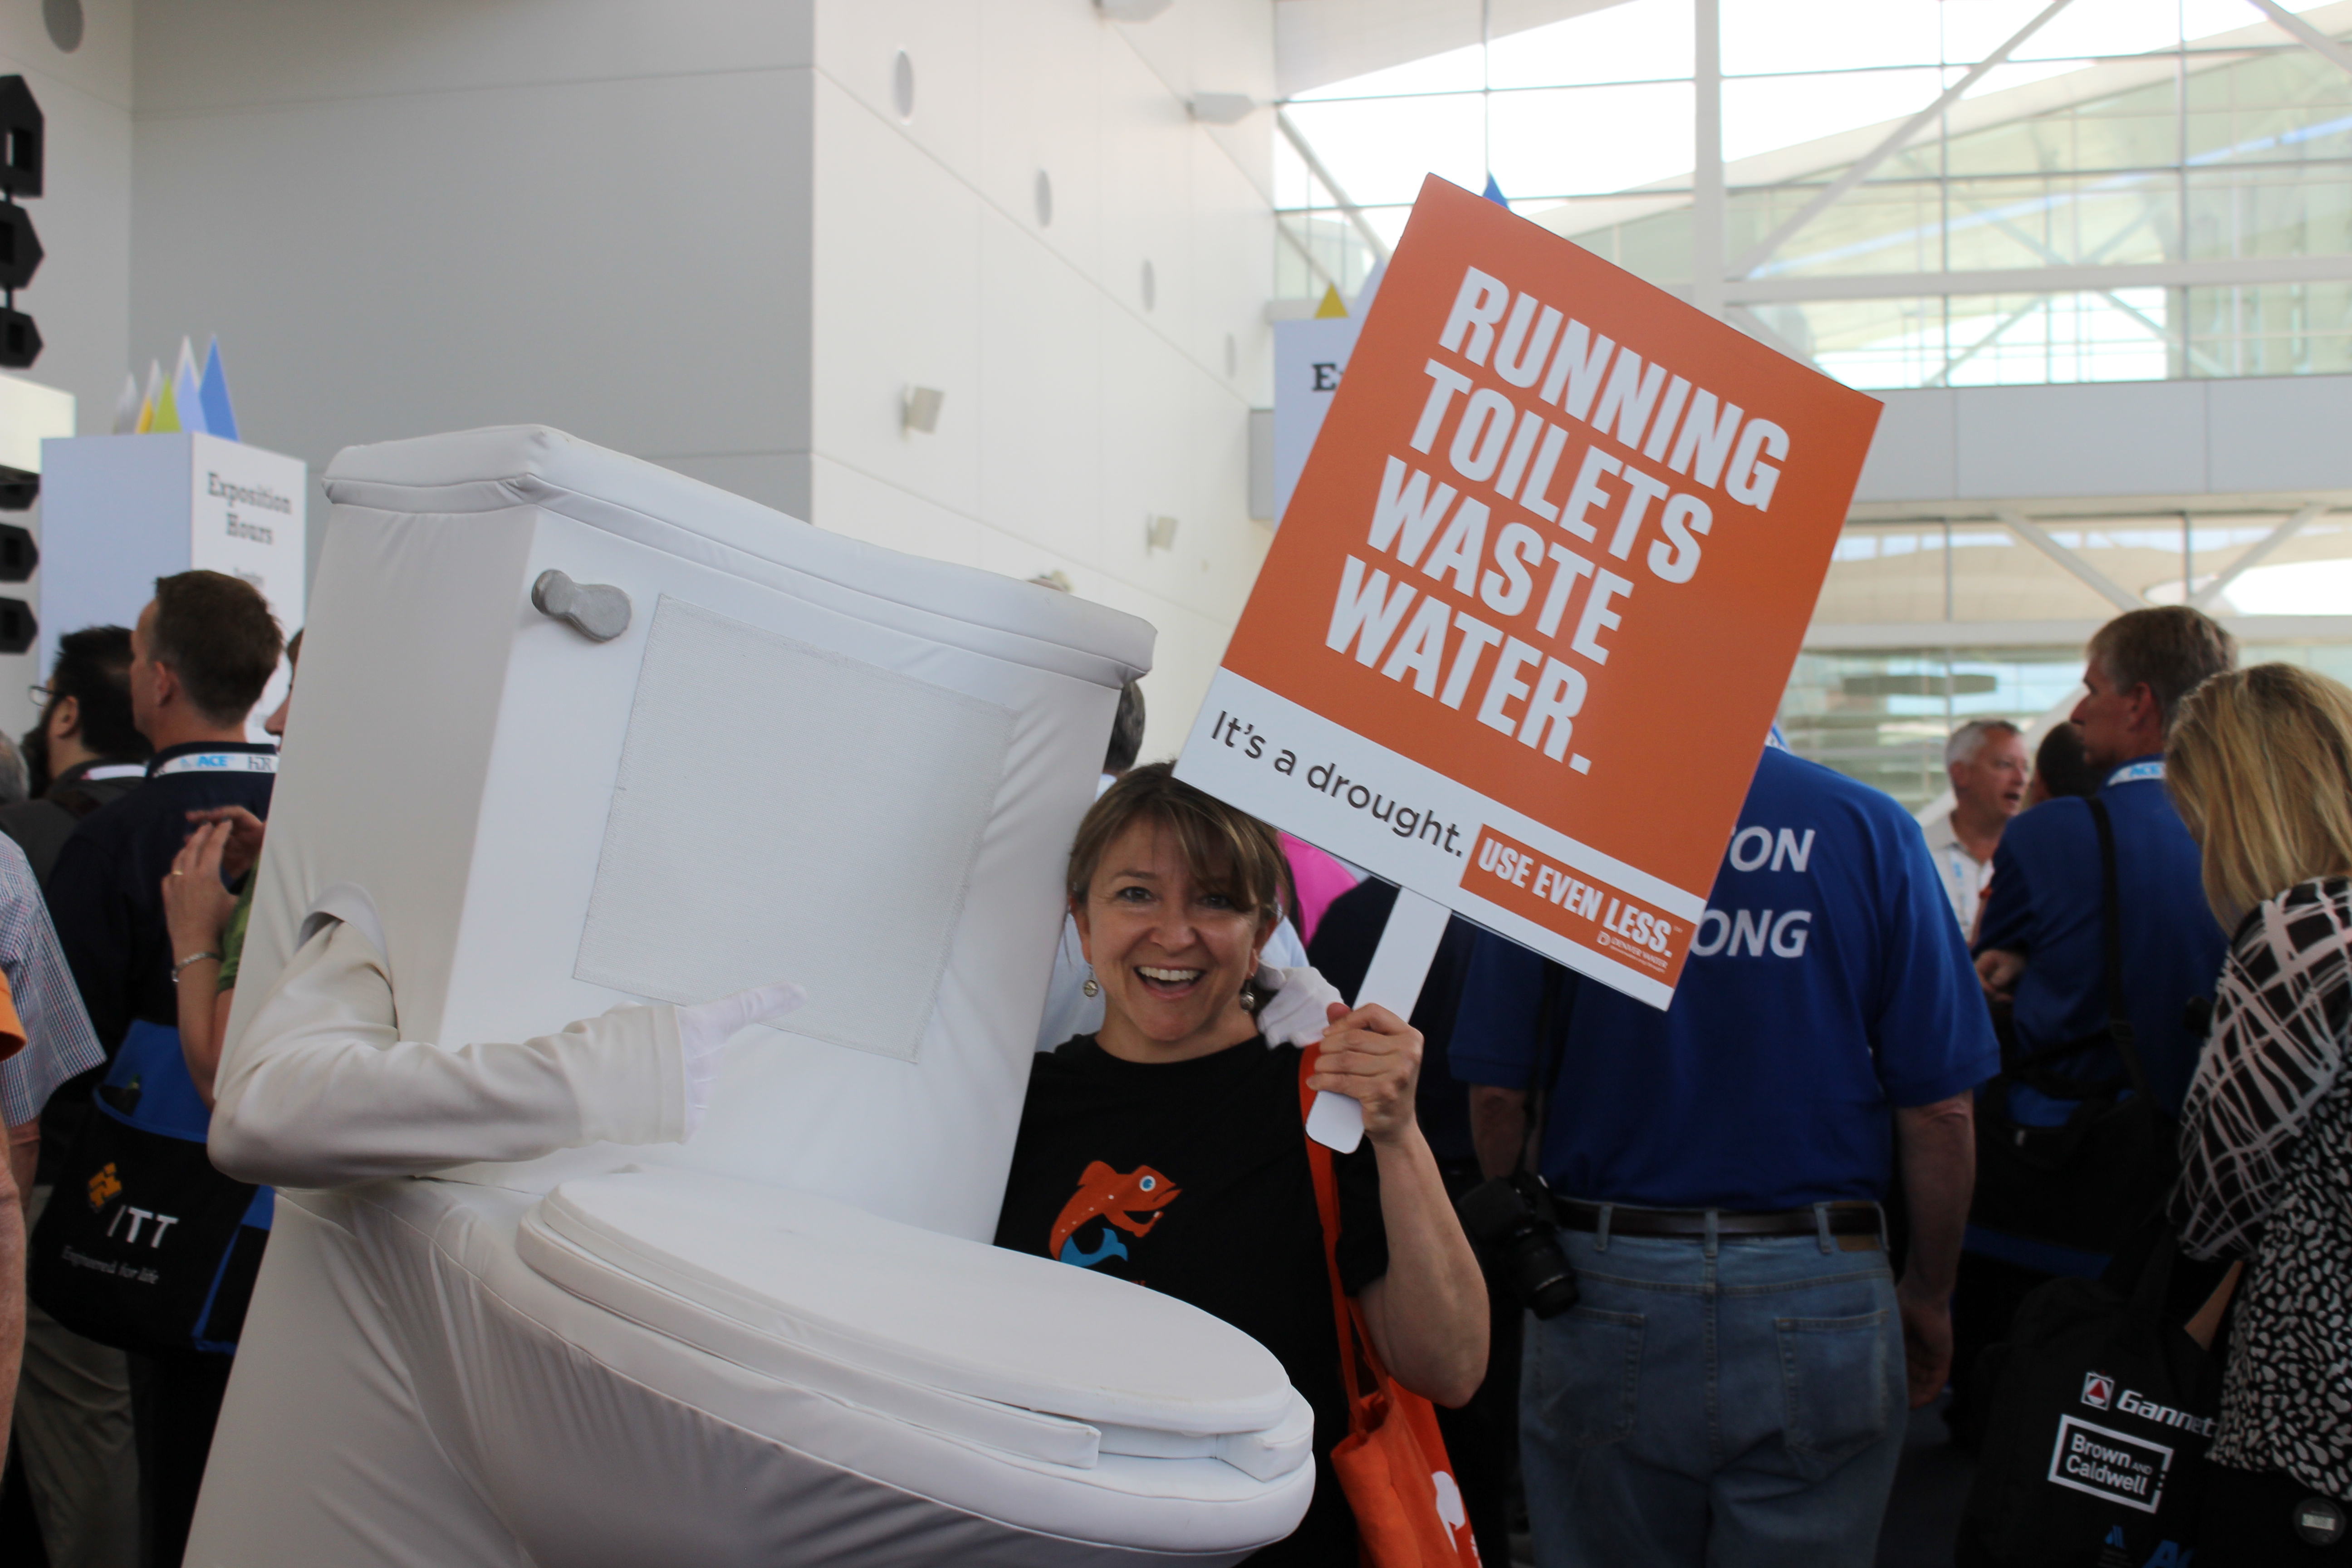 Image of Denver Water's running toilet and a sign that says running toilets waste water.